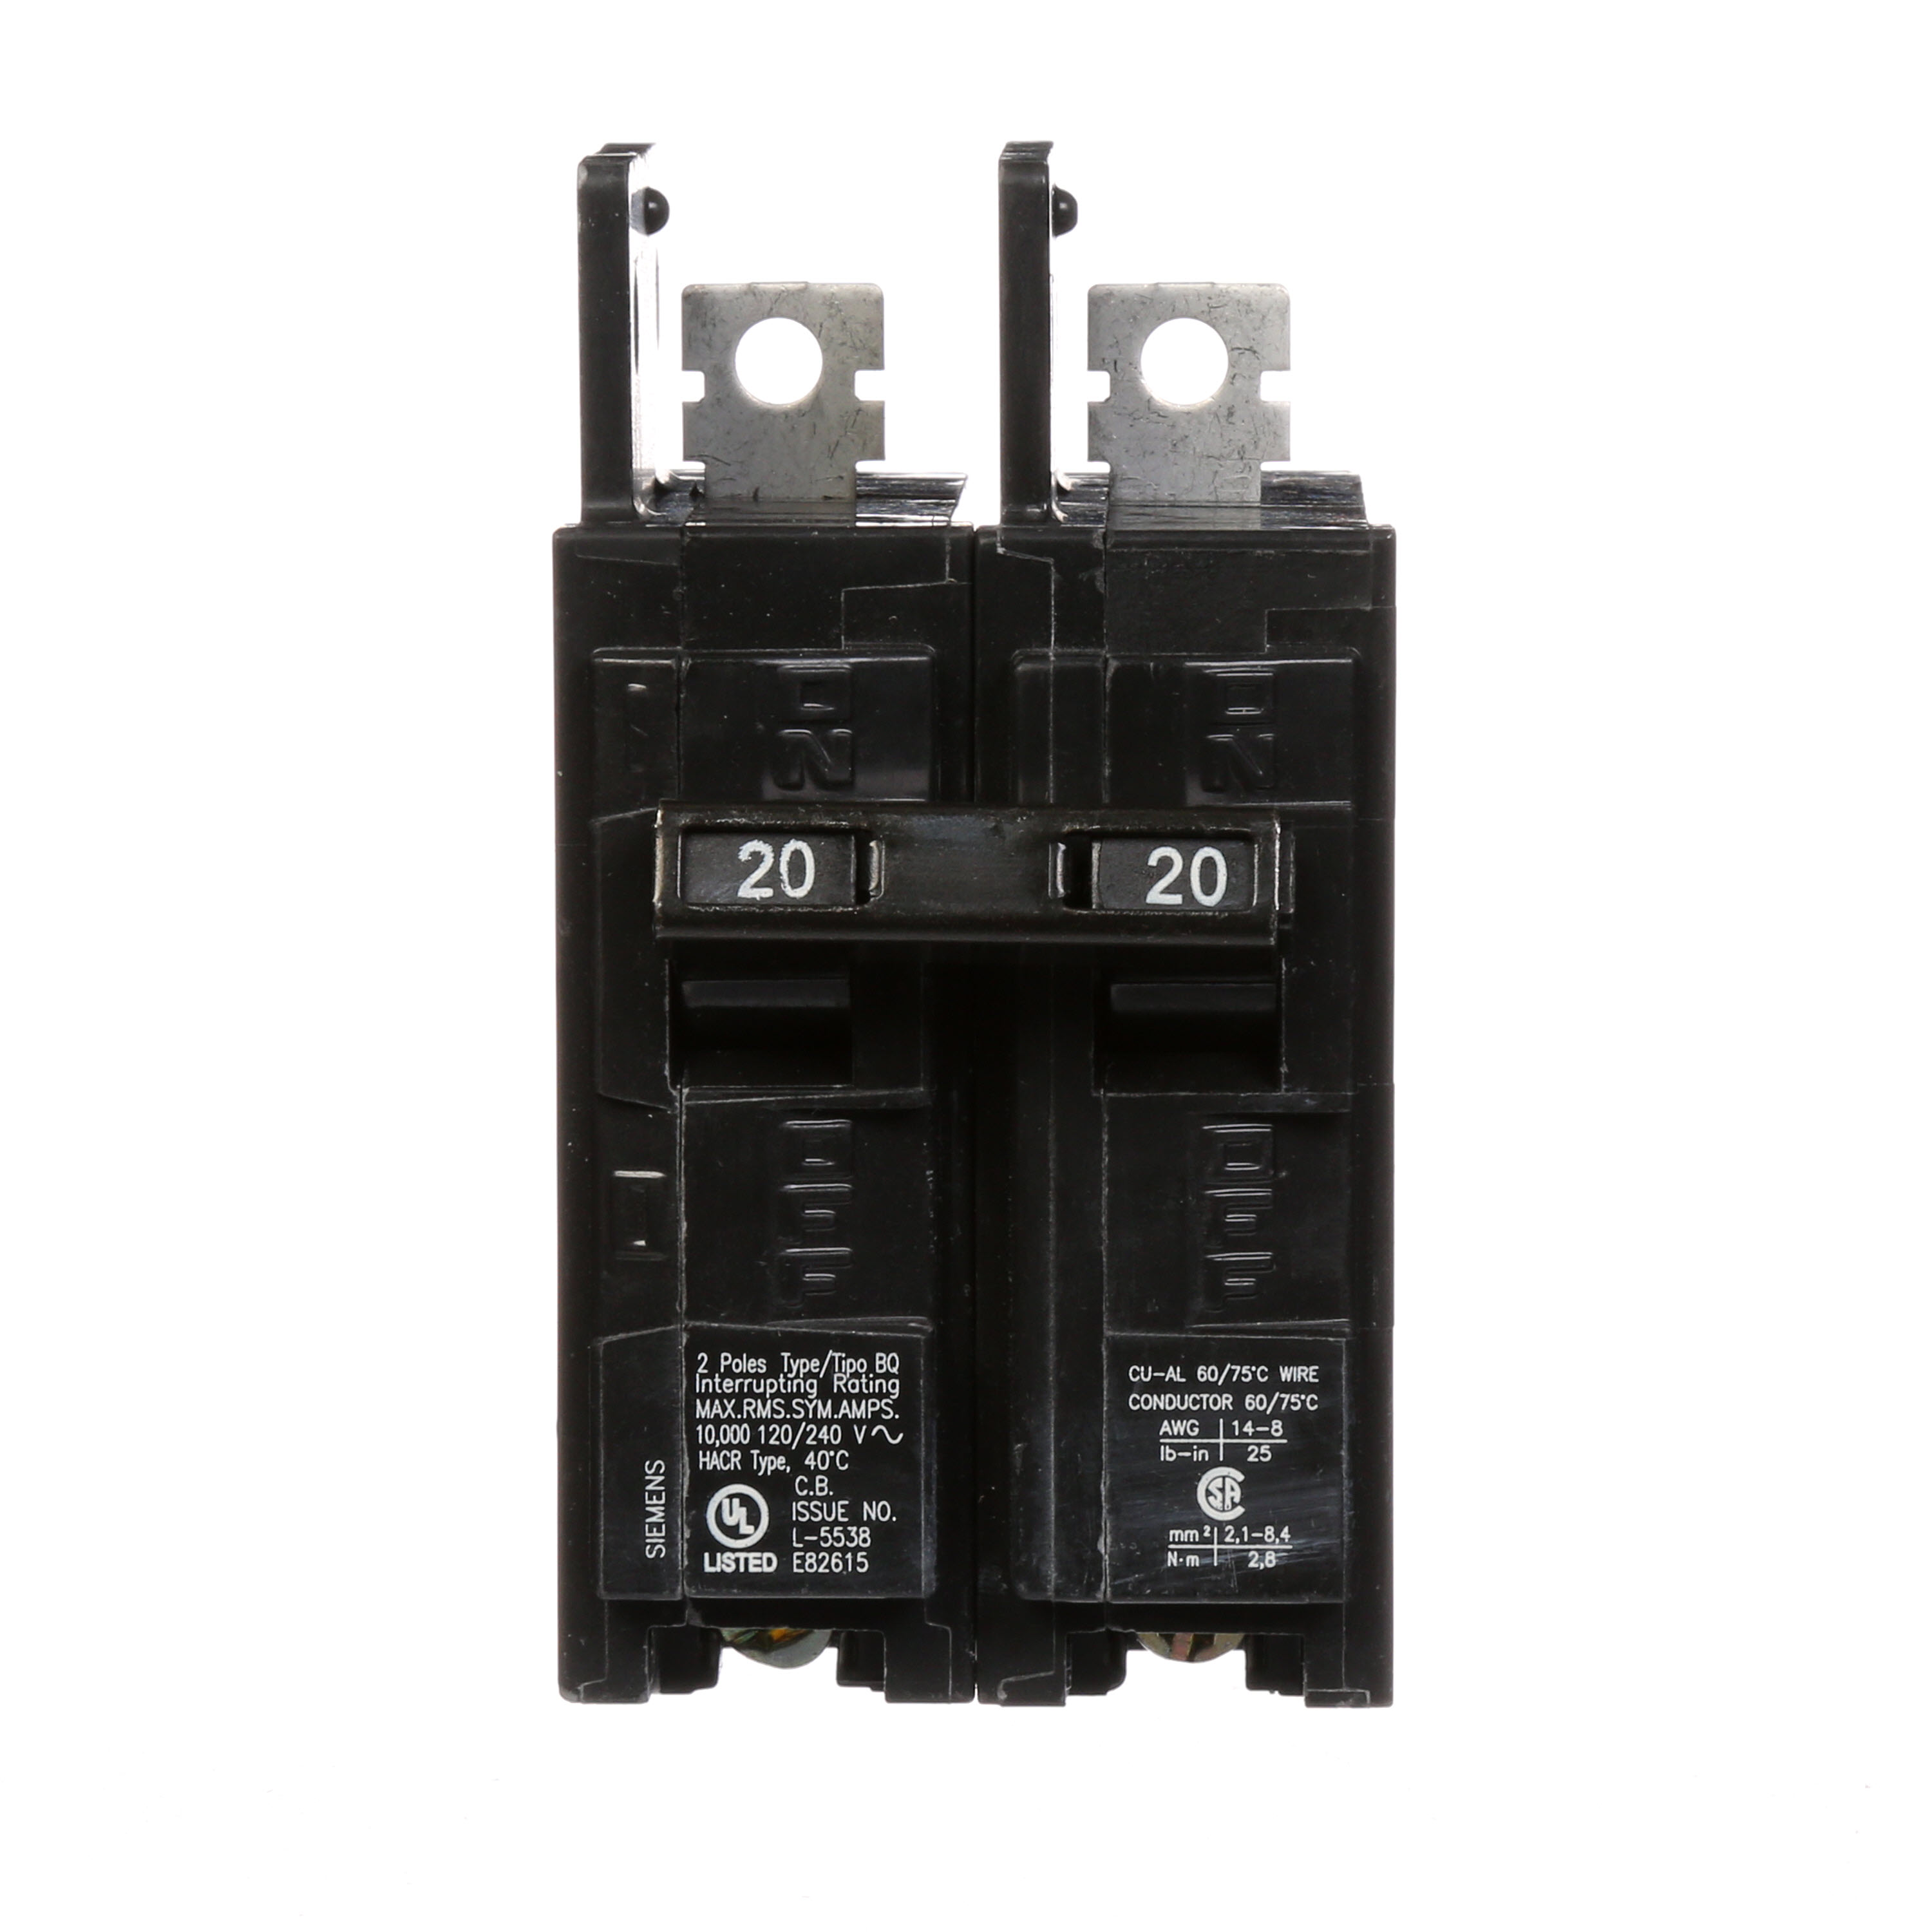 Siemens Low Voltage Molded Case Circuit Breakers General Purpose MCCBs - Type BQ, 2-Pole, 120/240VAC are Circuit Protection Molded Case Circuit Breakers. 2-Pole Common-Trip circuit breaker type BQ. Rated 120/240V (020A) (AIR 10 kA). Special features Load side lugs are included.